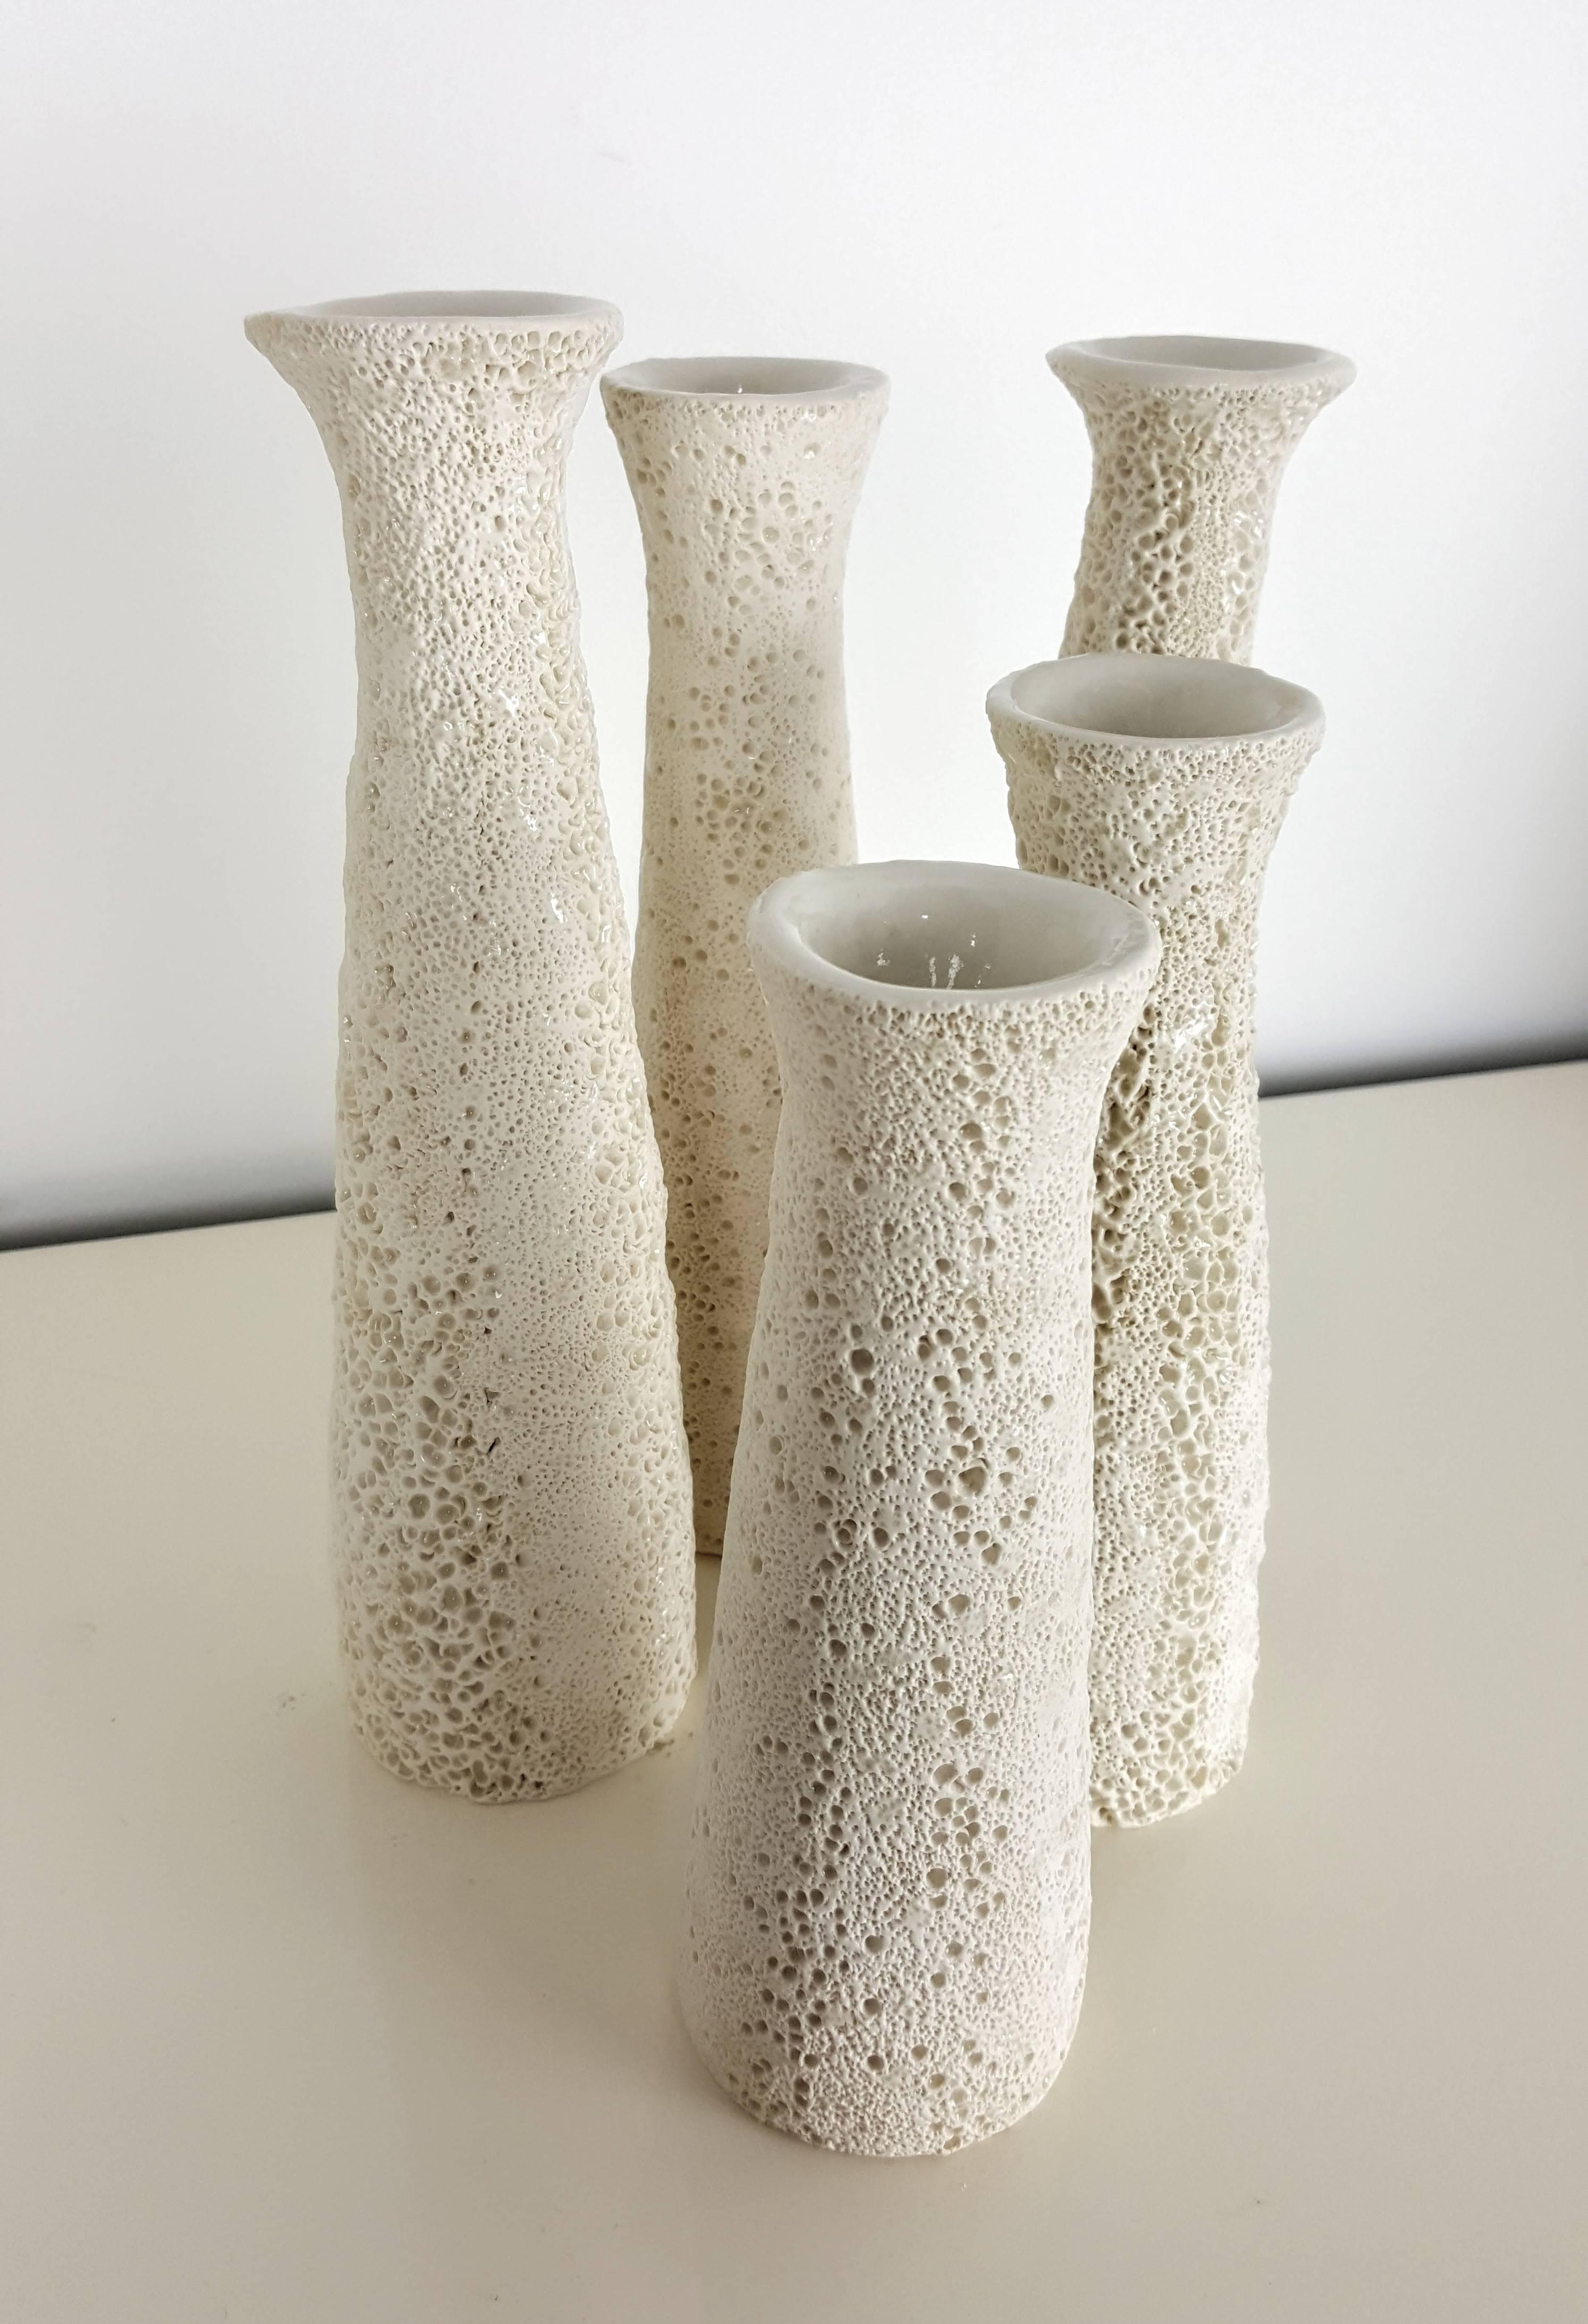 Organic Modern Grouping of Candlesticks with Organic Coral Texture by Judi Tavill, 2016